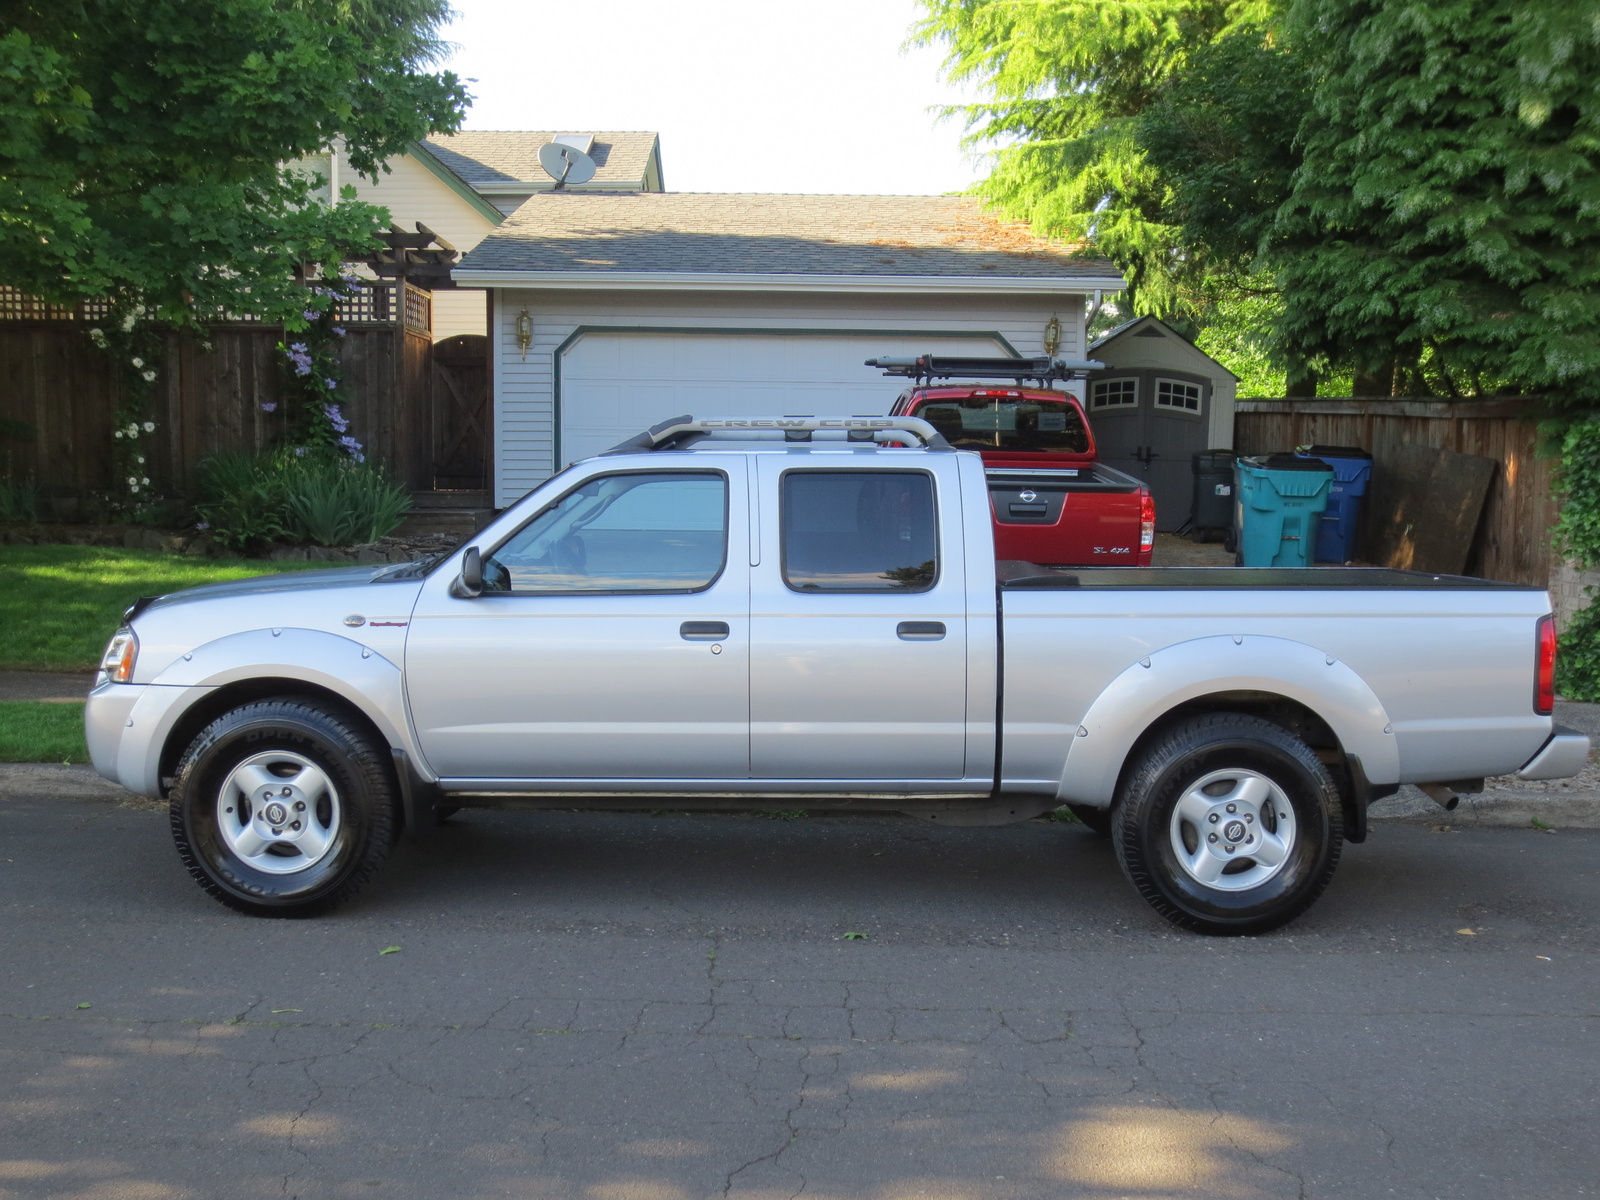 2002 Nissan frontier supercharged specs #3